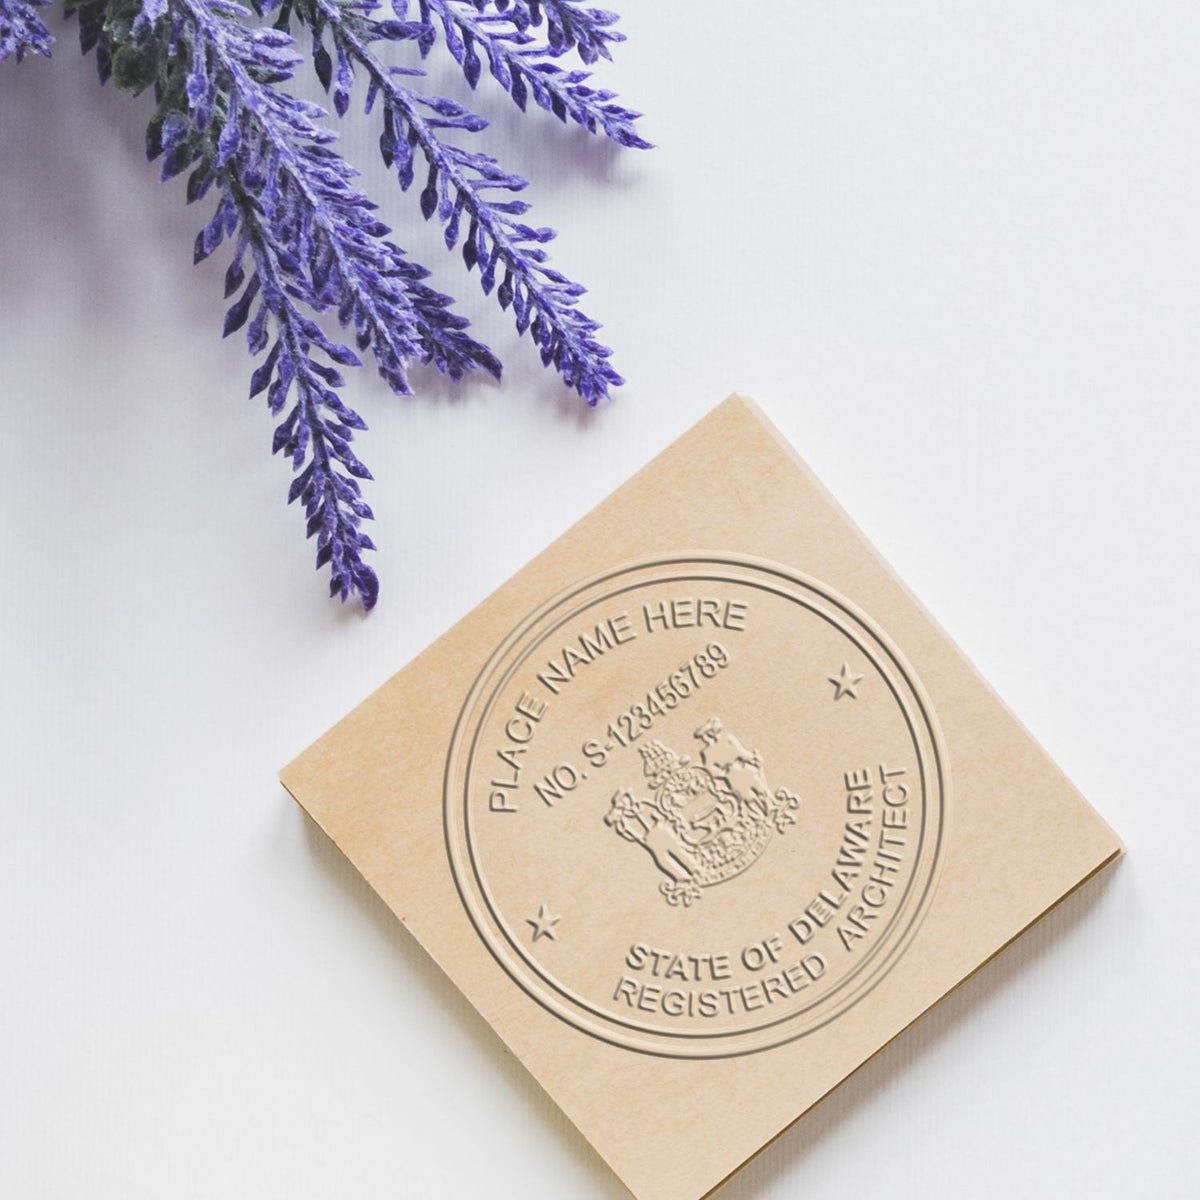 The Delaware Desk Architect Embossing Seal stamp impression comes to life with a crisp, detailed photo on paper - showcasing true professional quality.